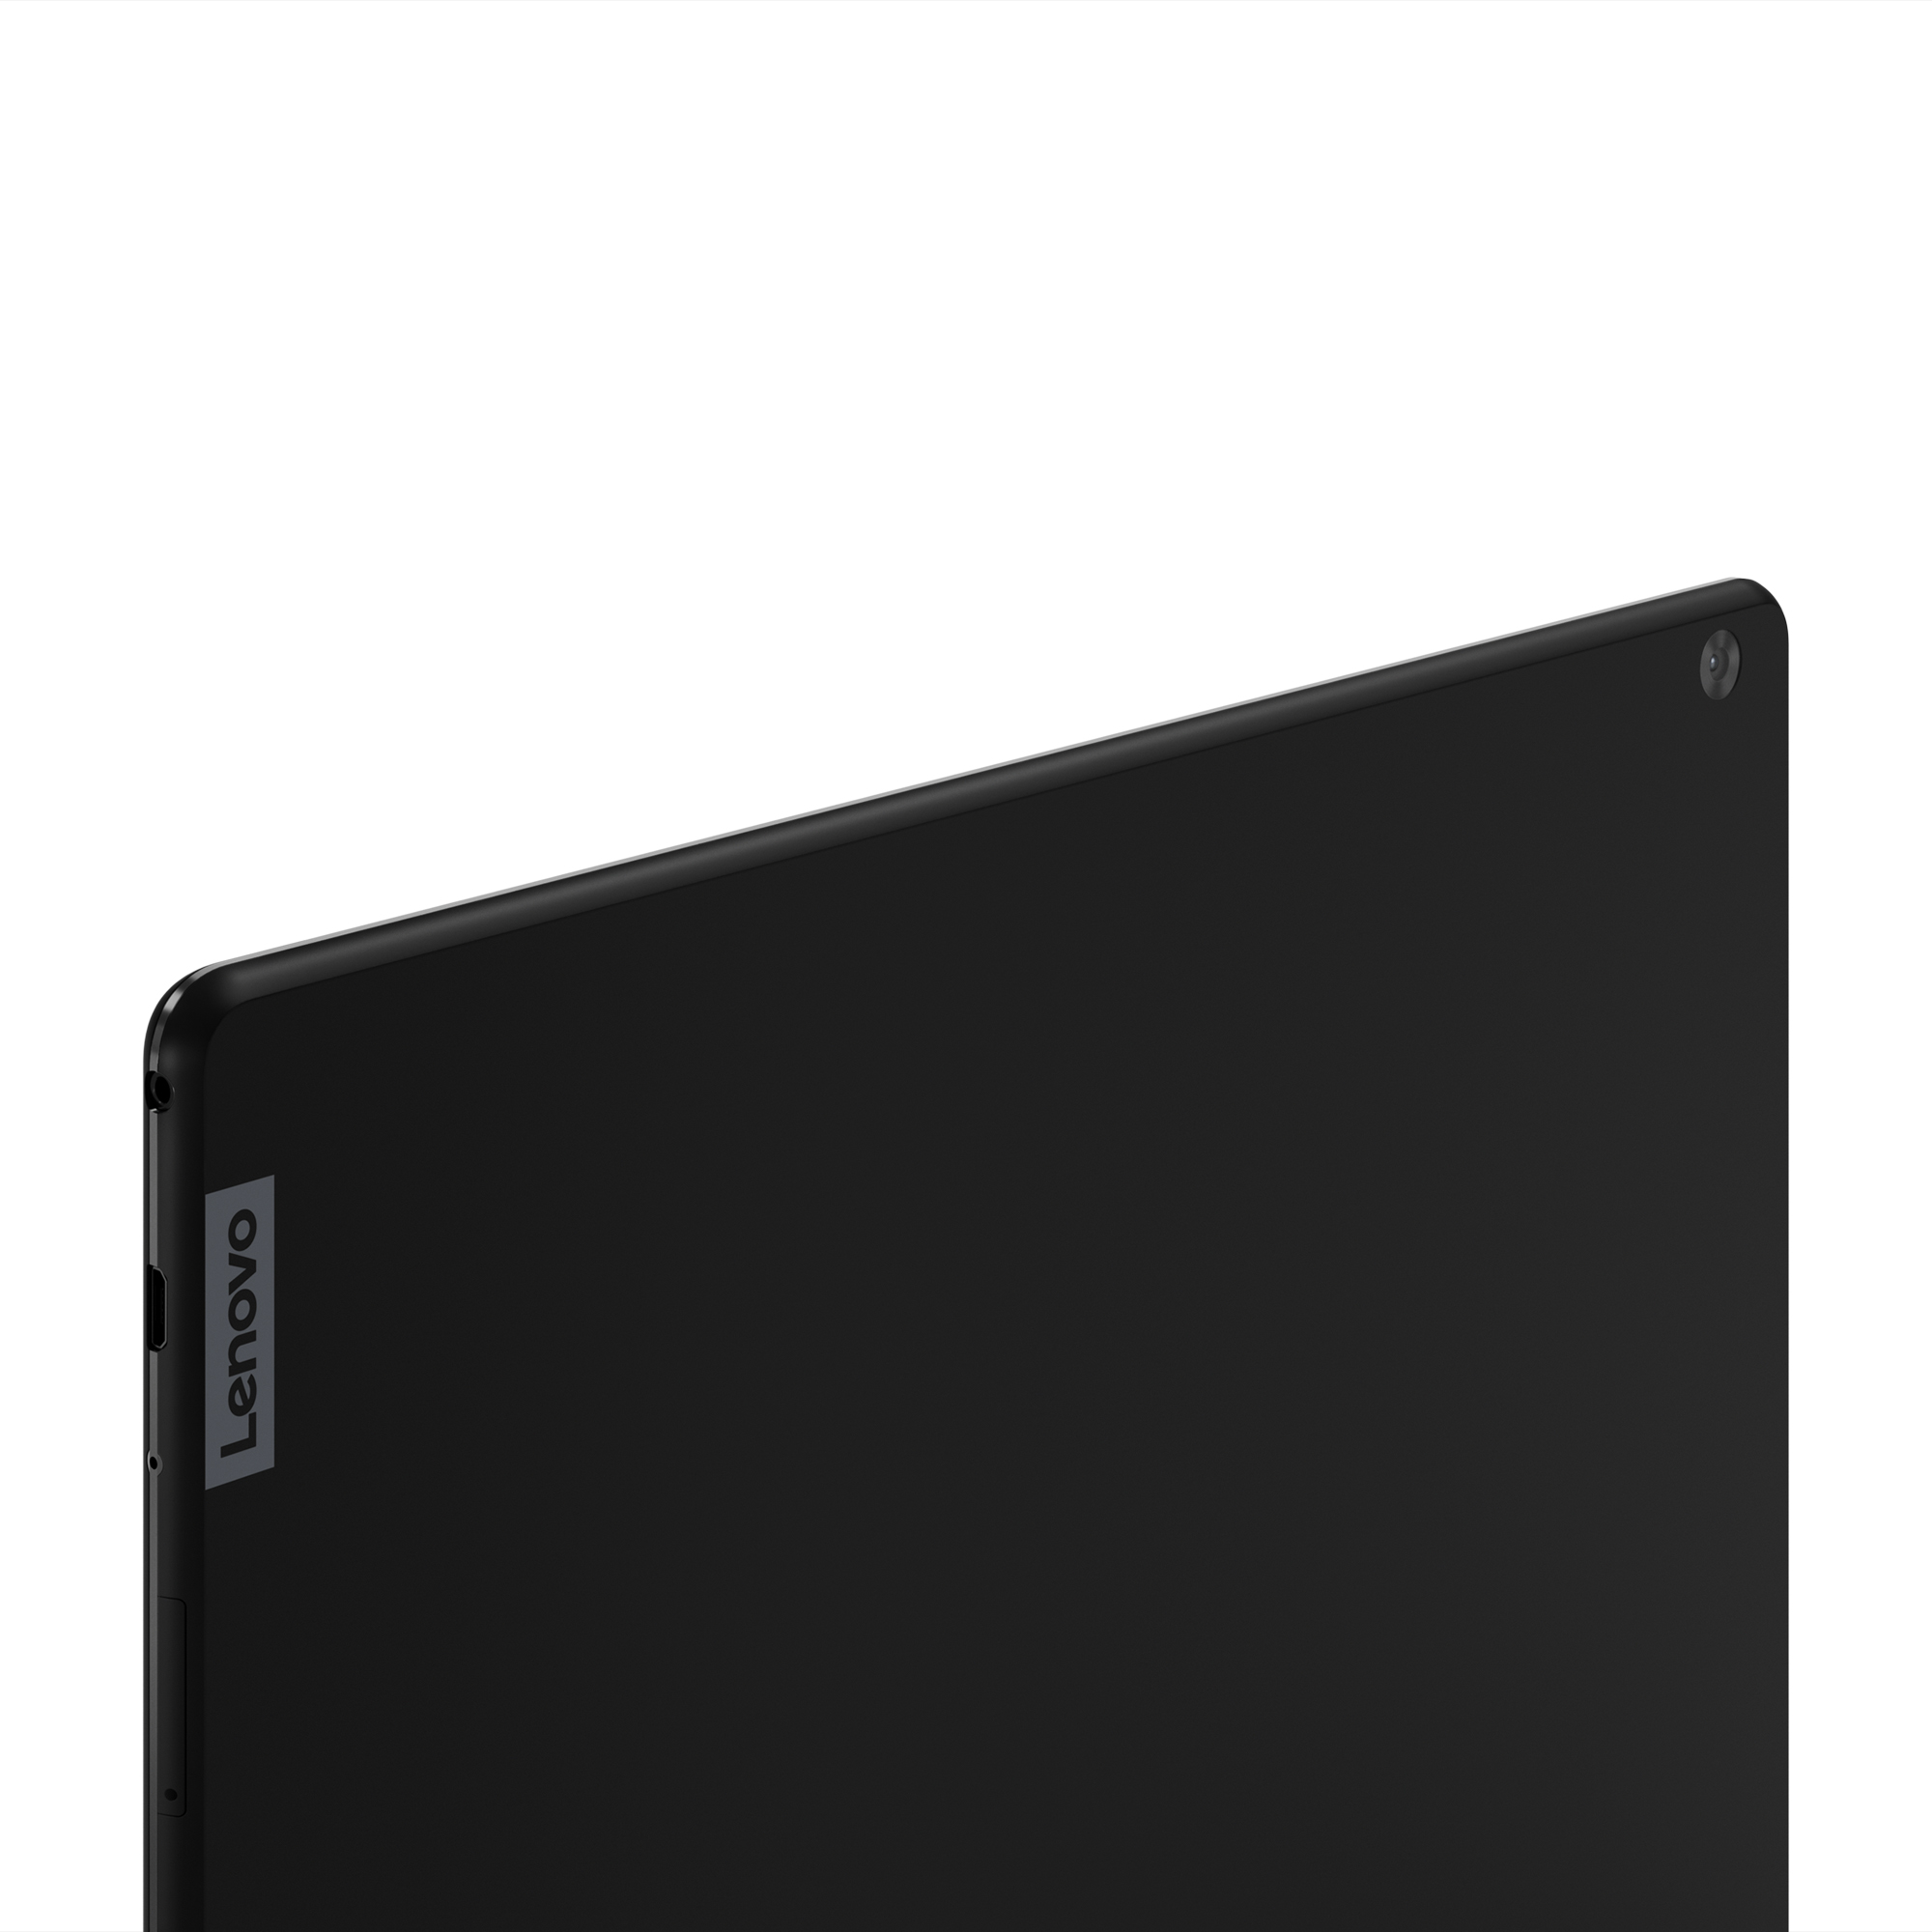 Lenovo Tab M10 10.1” (Android tablet) 32GB - image 6 of 9